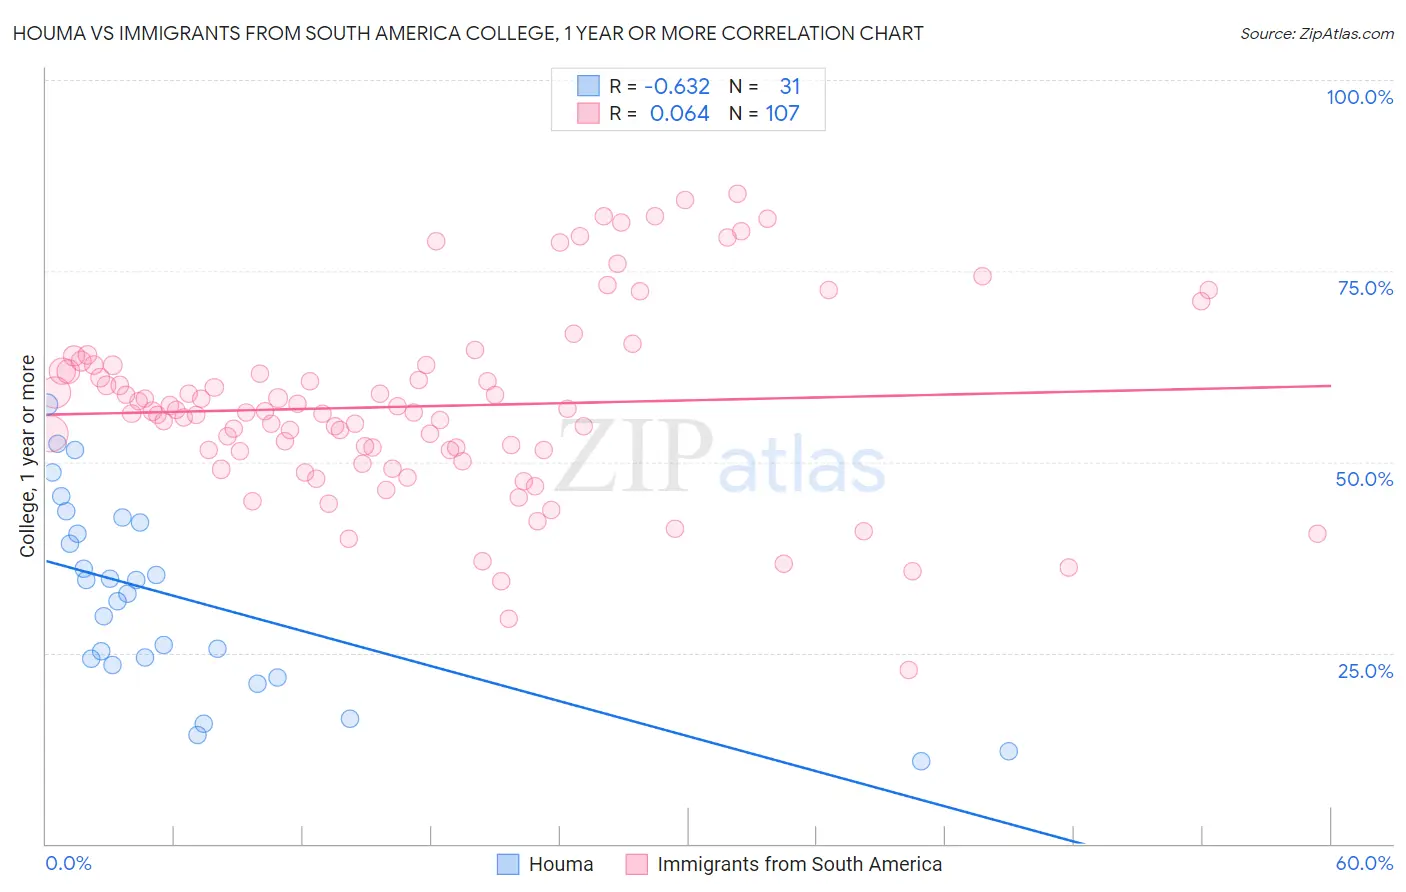 Houma vs Immigrants from South America College, 1 year or more